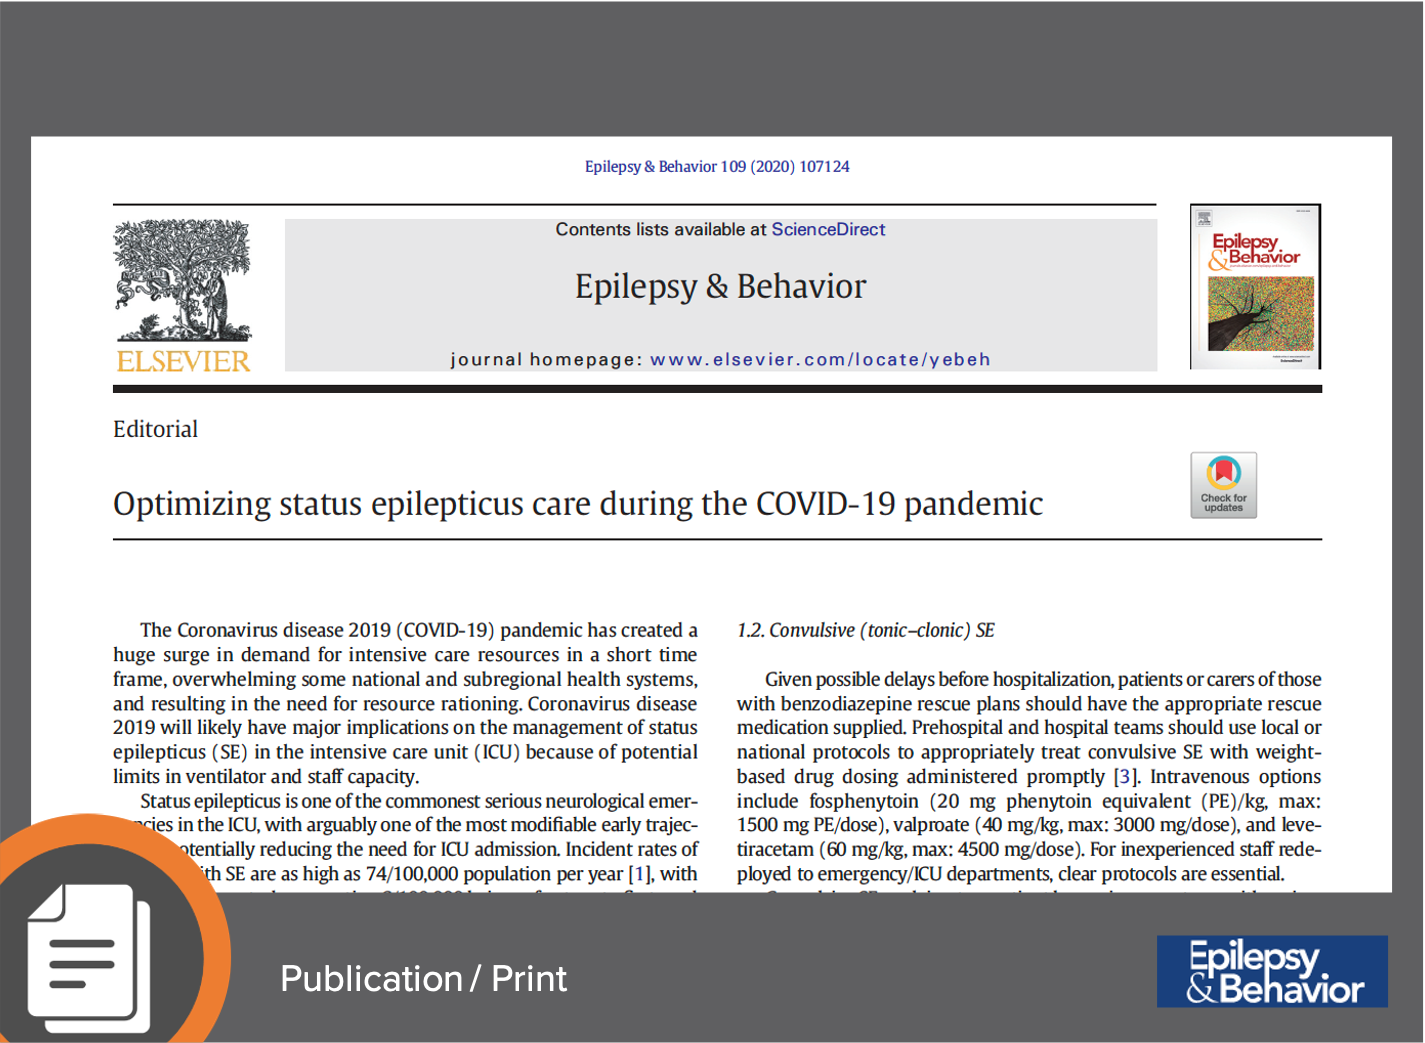 Editorial: Optimizing status epilepticus care during the COVID-19 pandemic